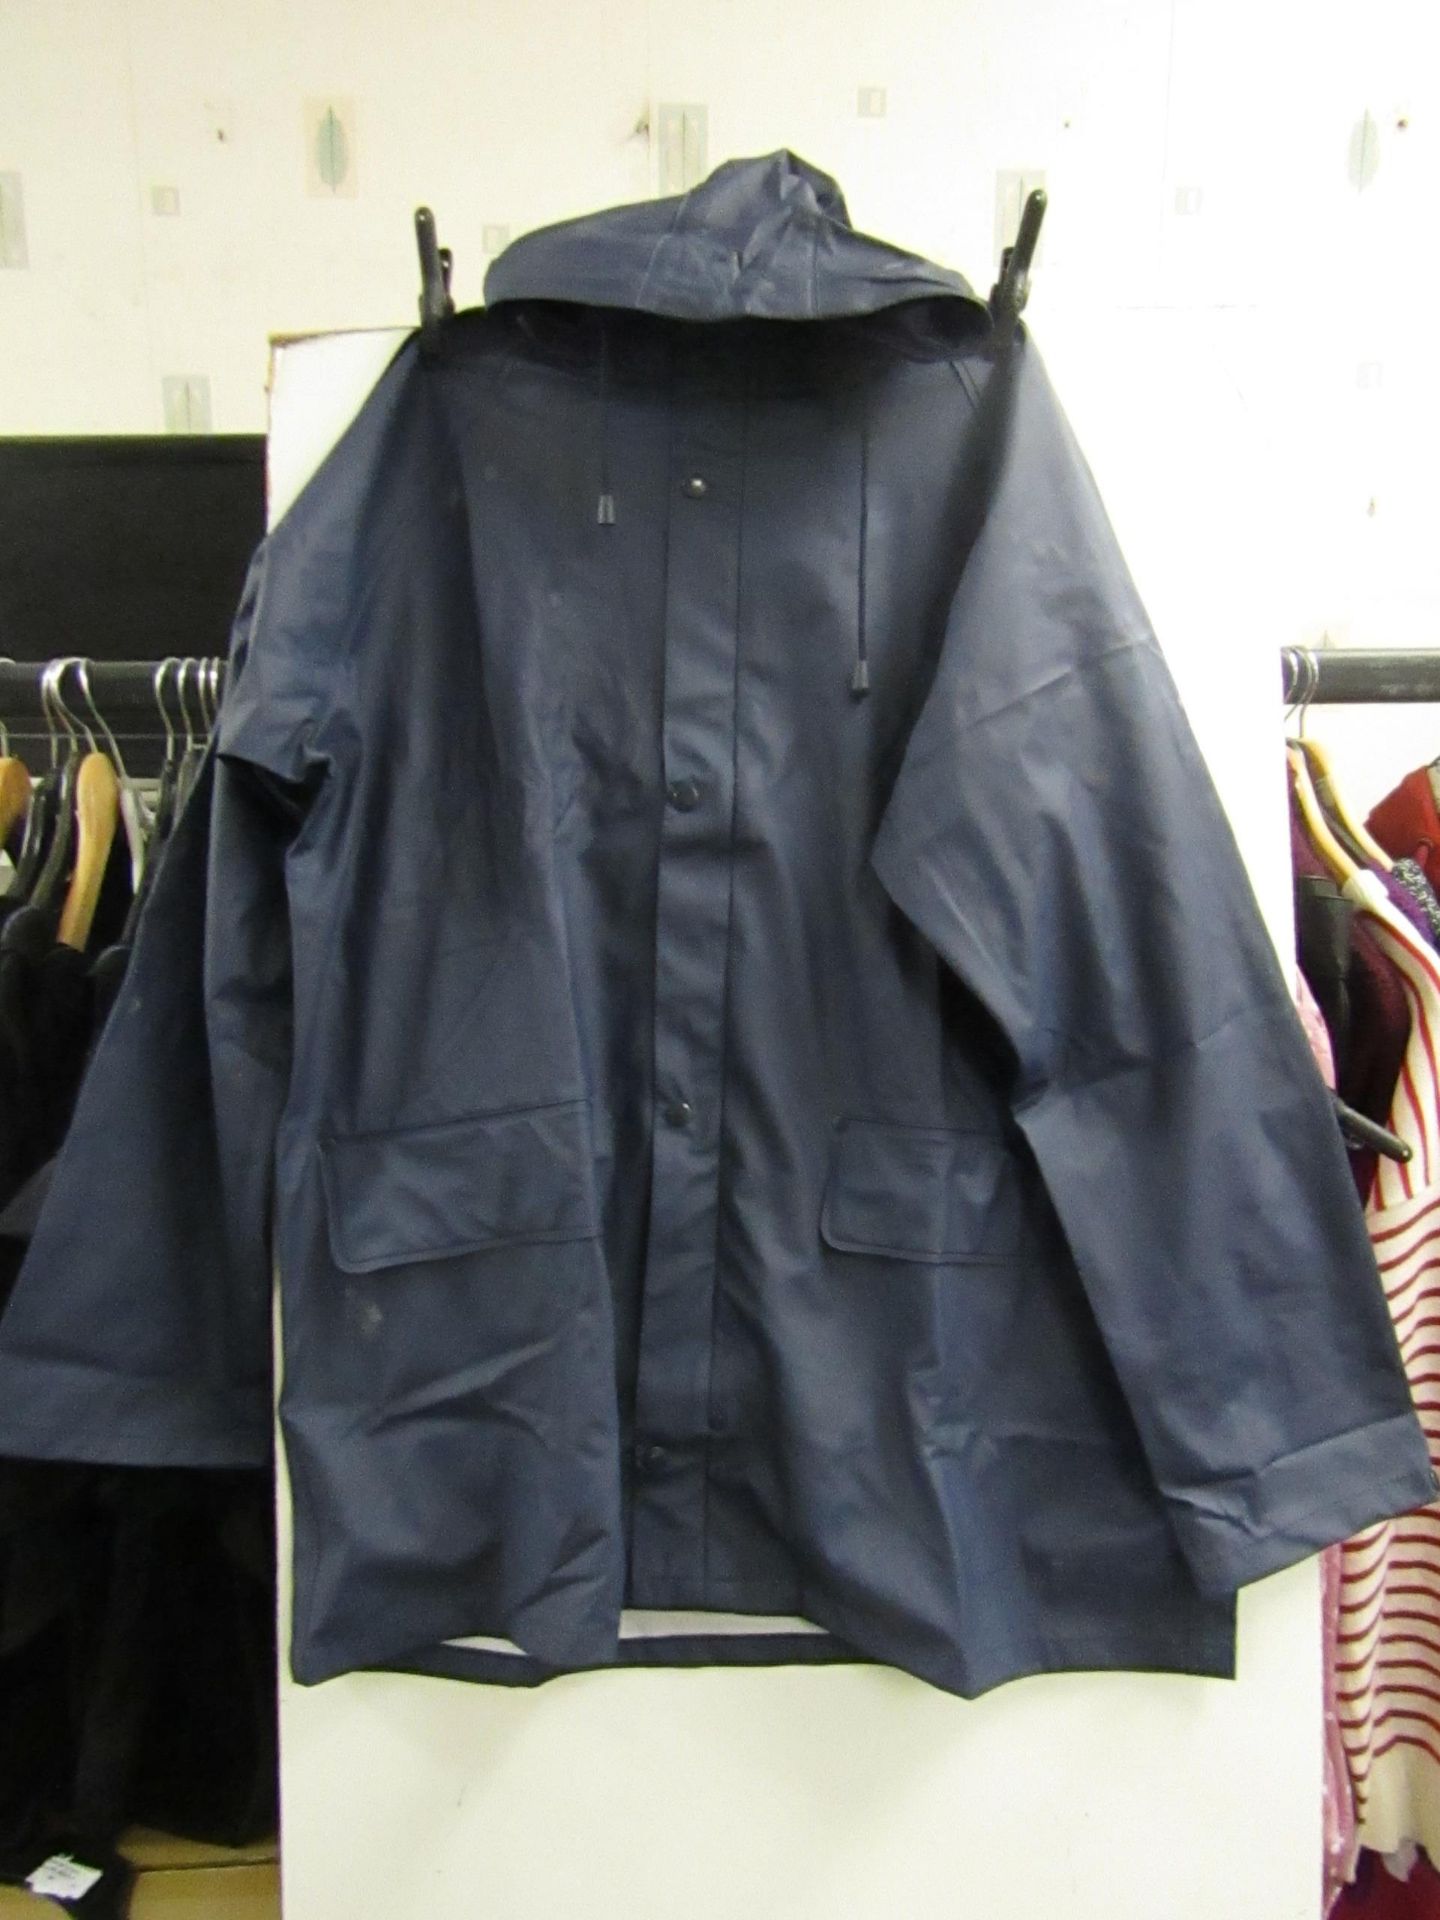 Hiking goods craftland jacket, size M, new & packaged.